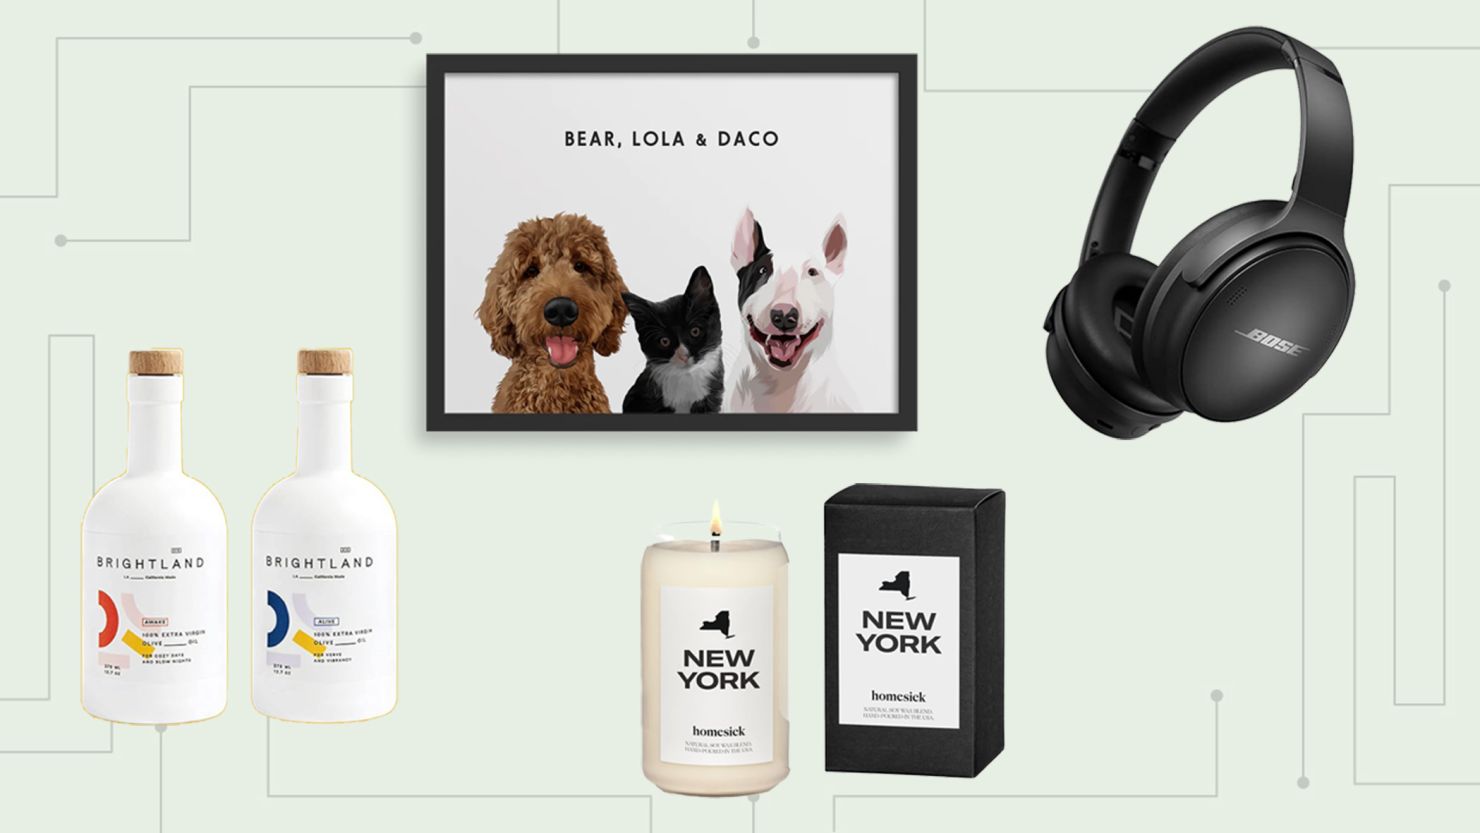 Cyber Monday Gift Guide - $10, $20, $30 Gifts and More! - Putting